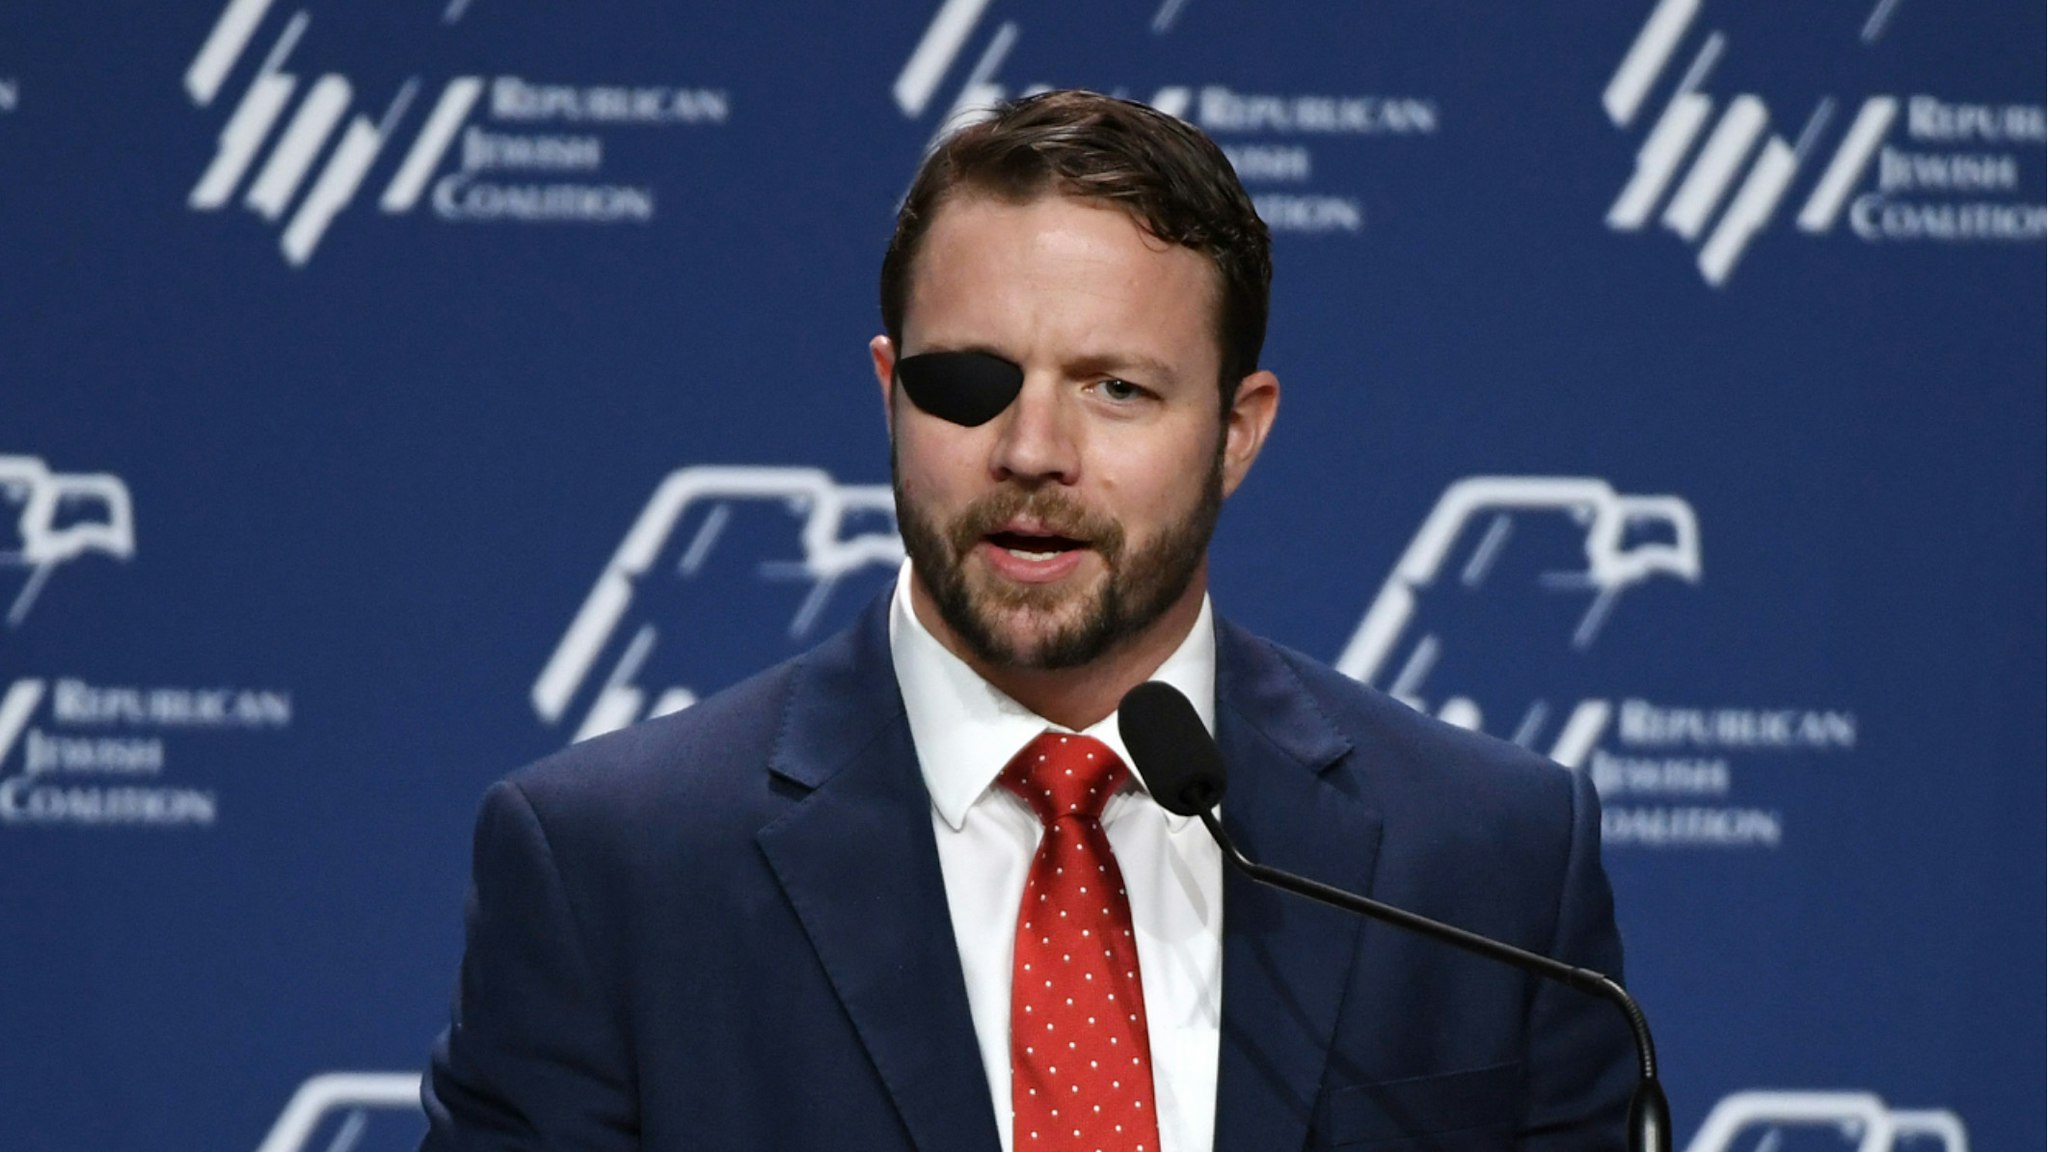 U.S. Rep. Dan Crenshaw (R-TX) speaks at the Republican Jewish Coalition's annual leadership meeting at The Venetian Las Vegas after appearances by U.S. President Donald Trump and Vice President Mike Pence on April 6, 2019 in Las Vegas, Nevada.